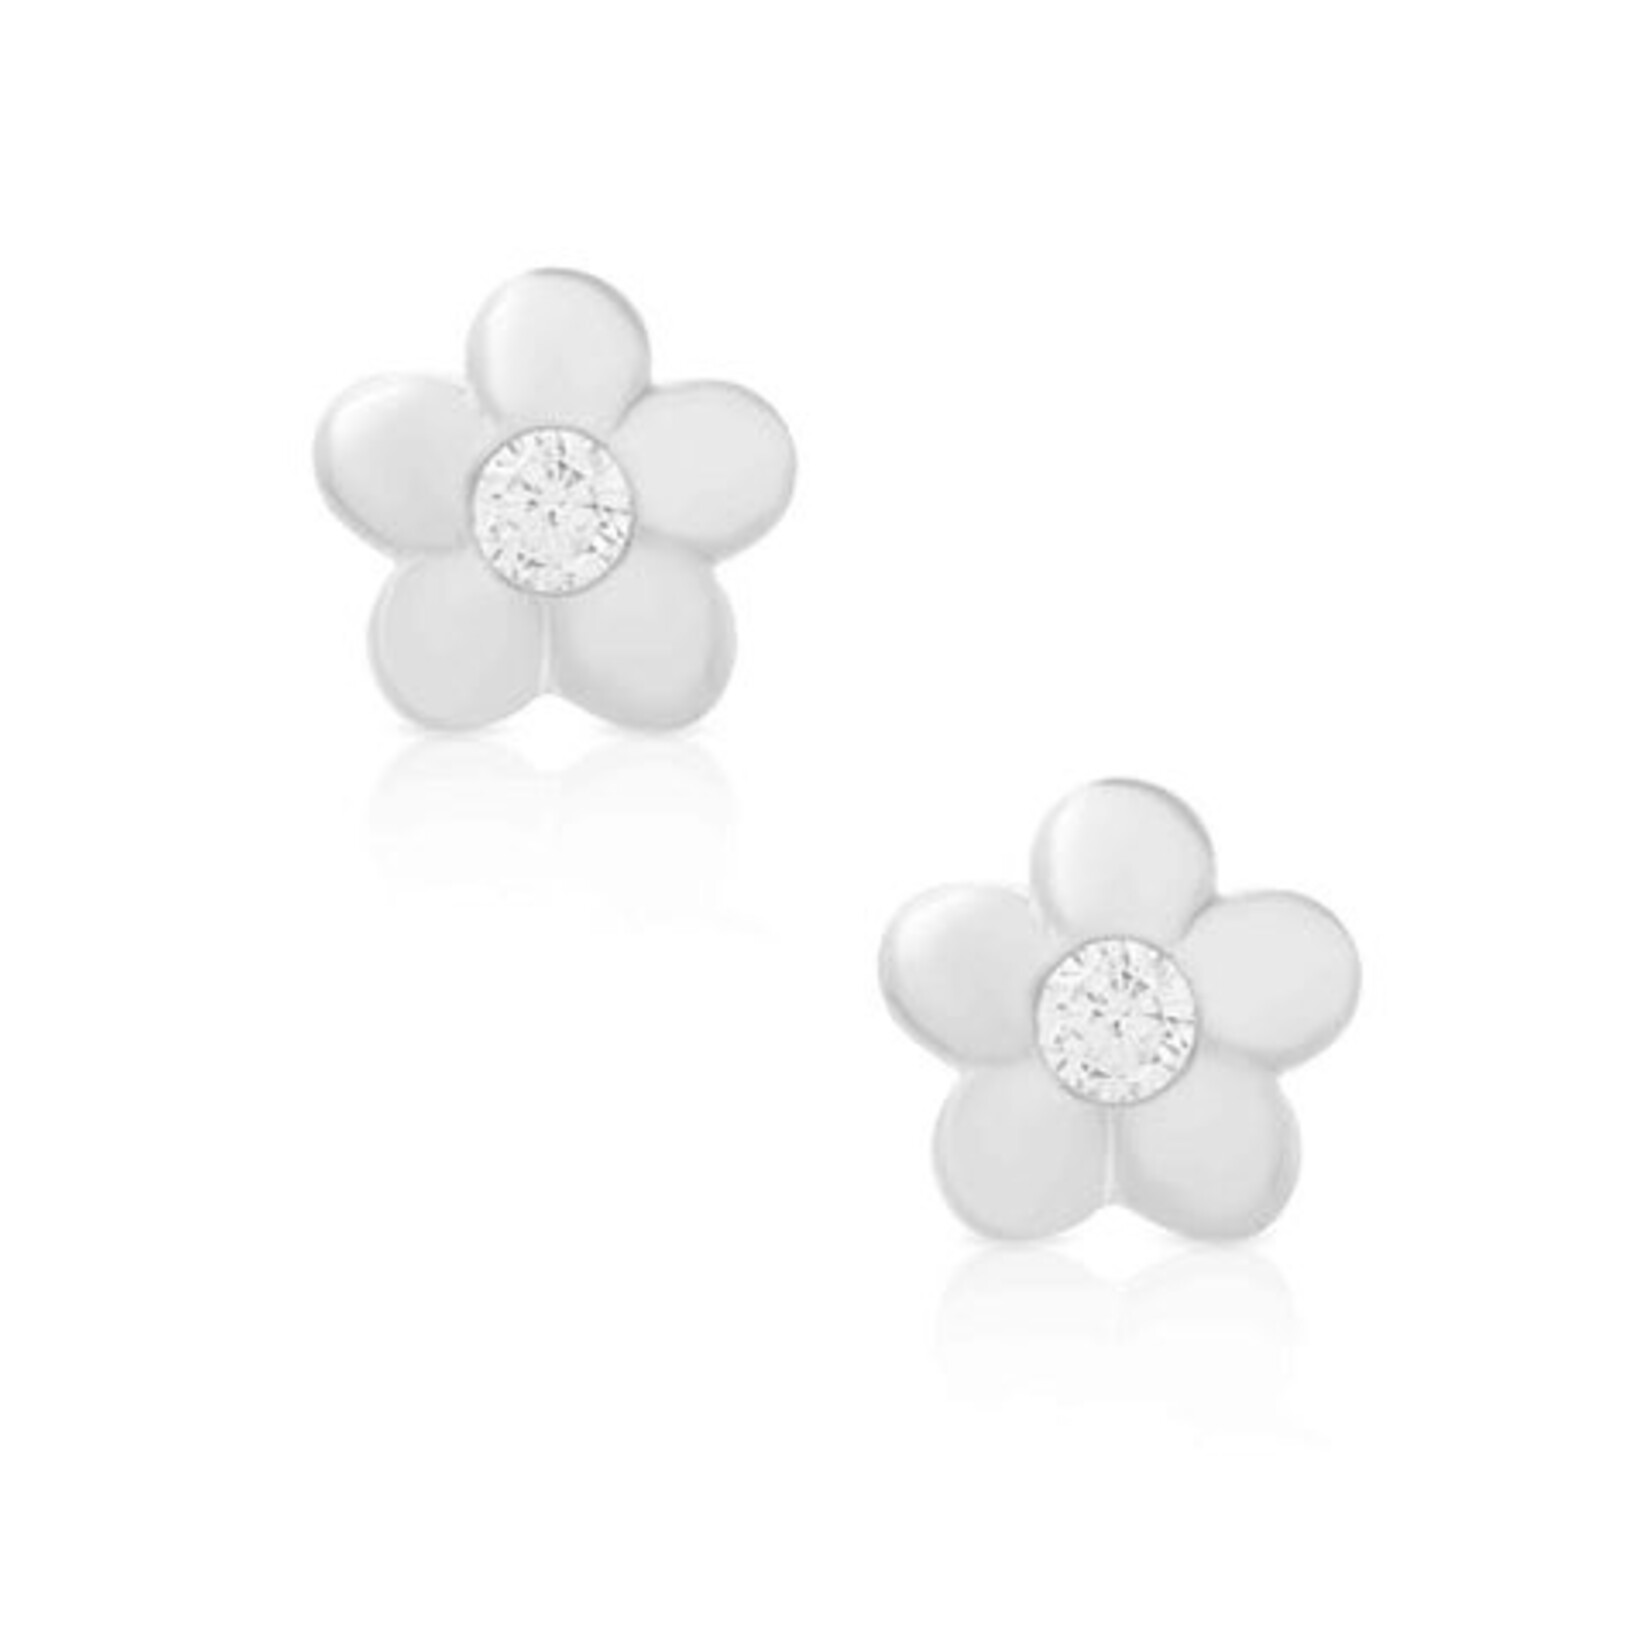 Lily Nily Flower CZ SS Earrings